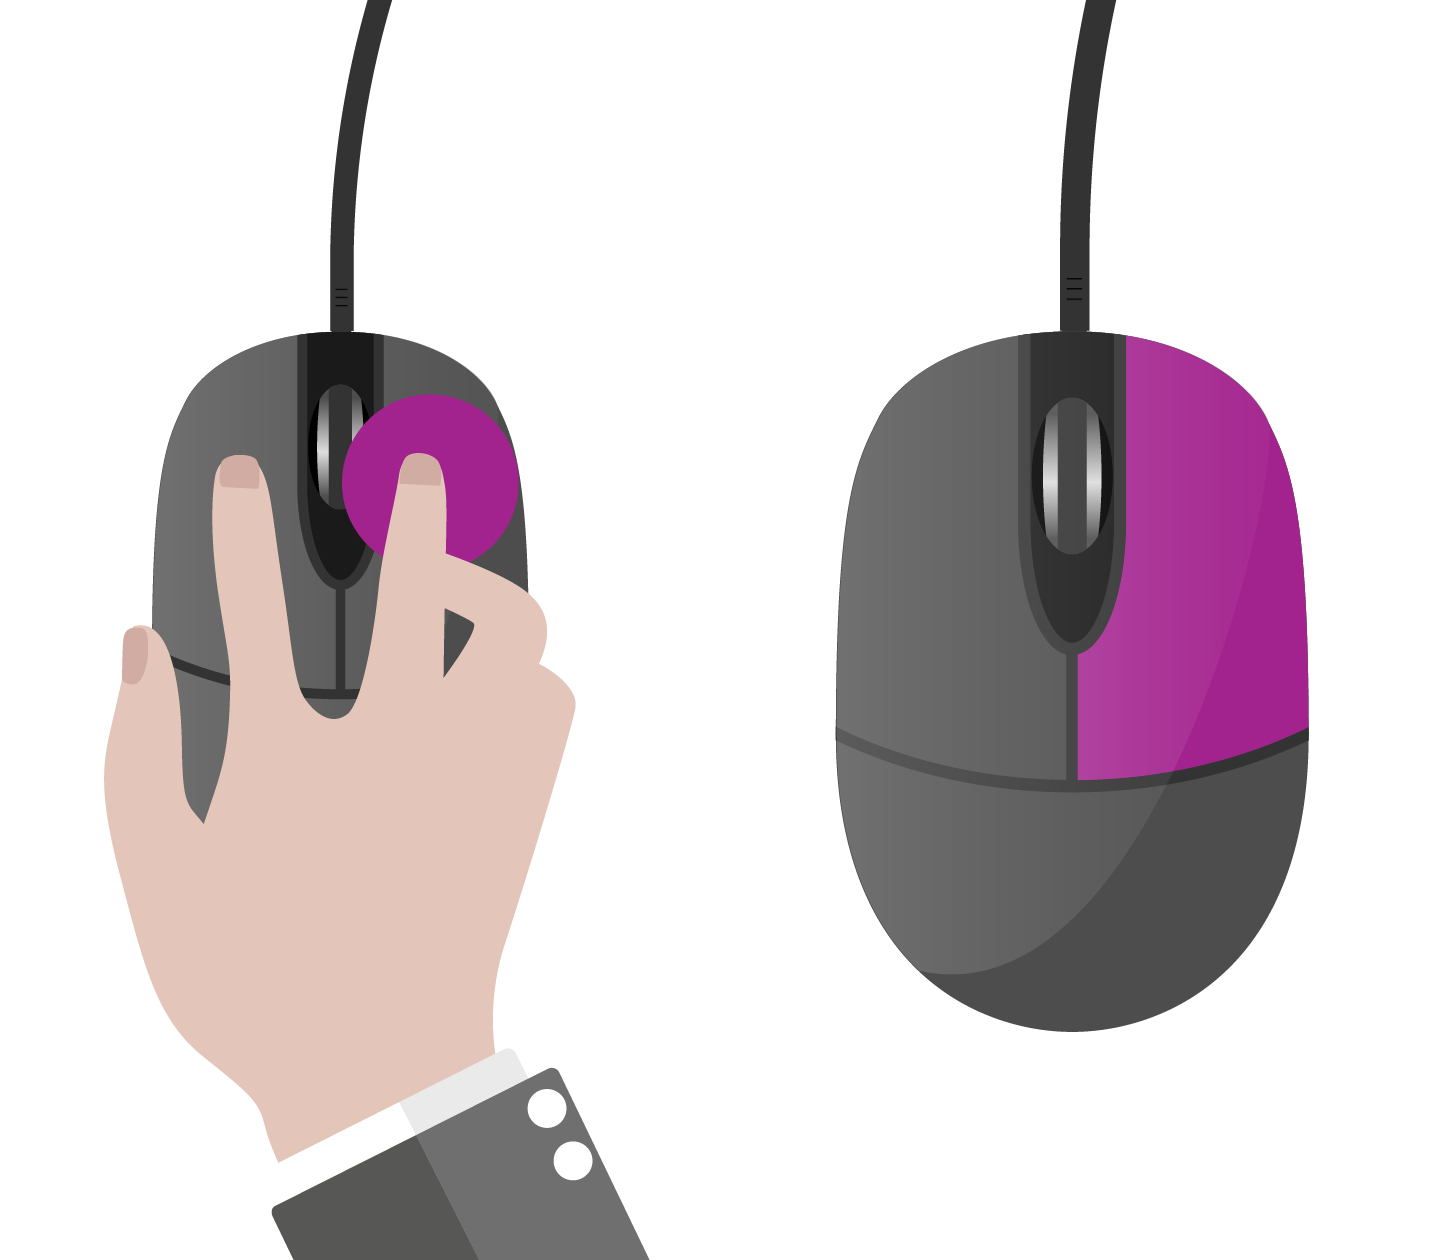 A left click on a mouse